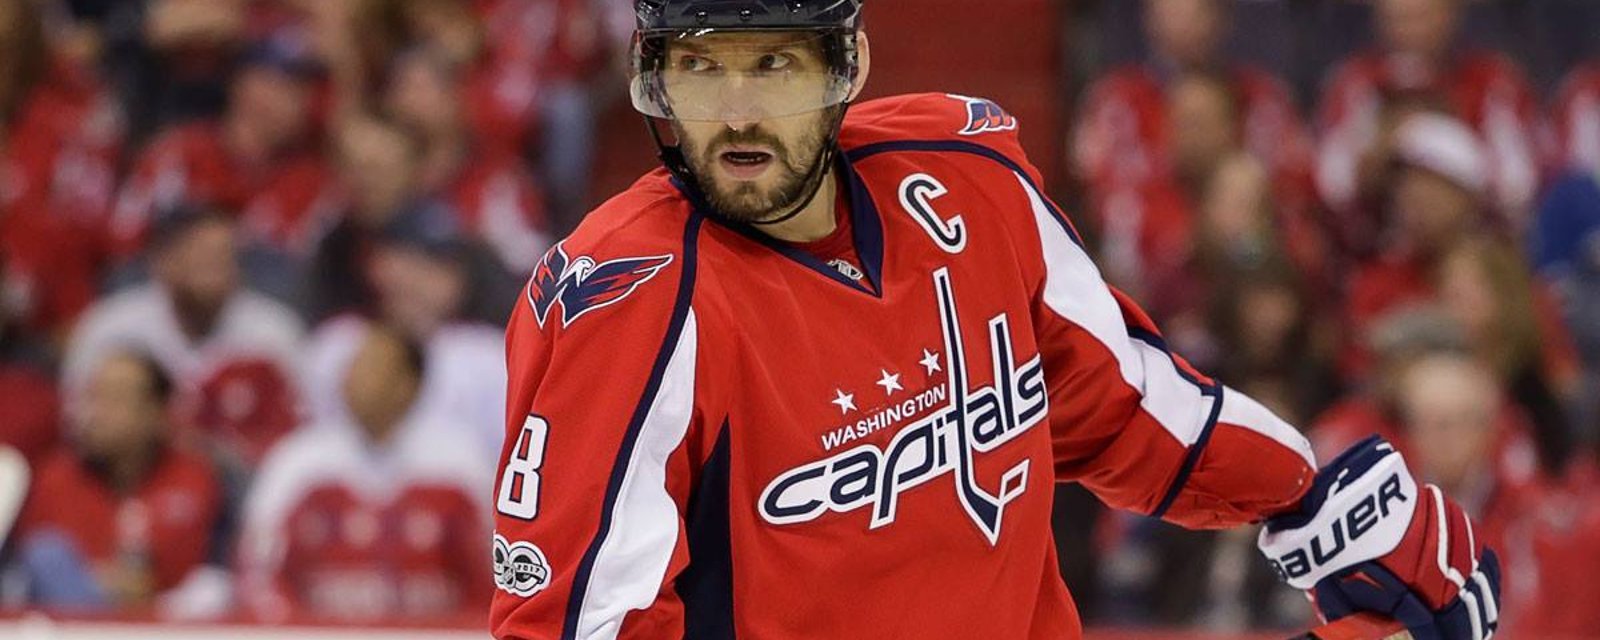 Ovechkin gives his jacket to an Edmonton homeless man